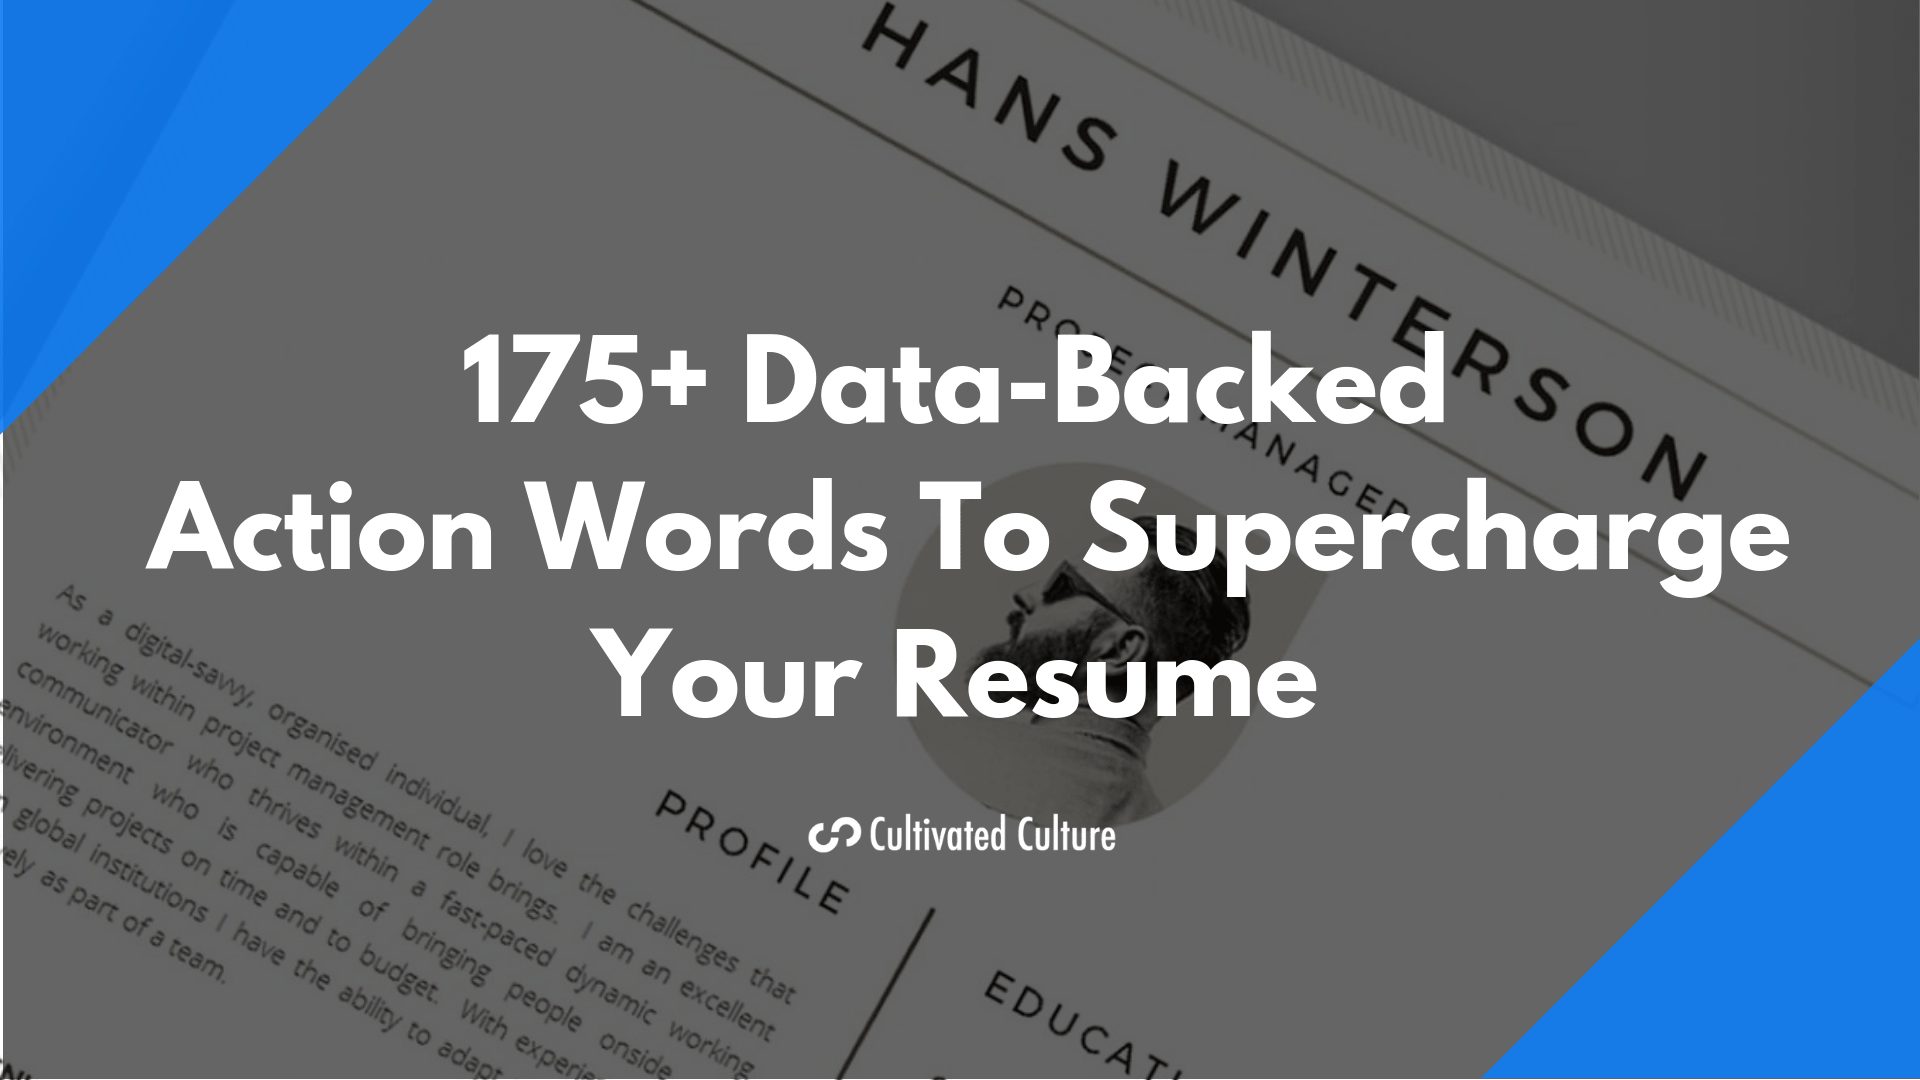 3 Short Stories You Didn't Know About RESUME